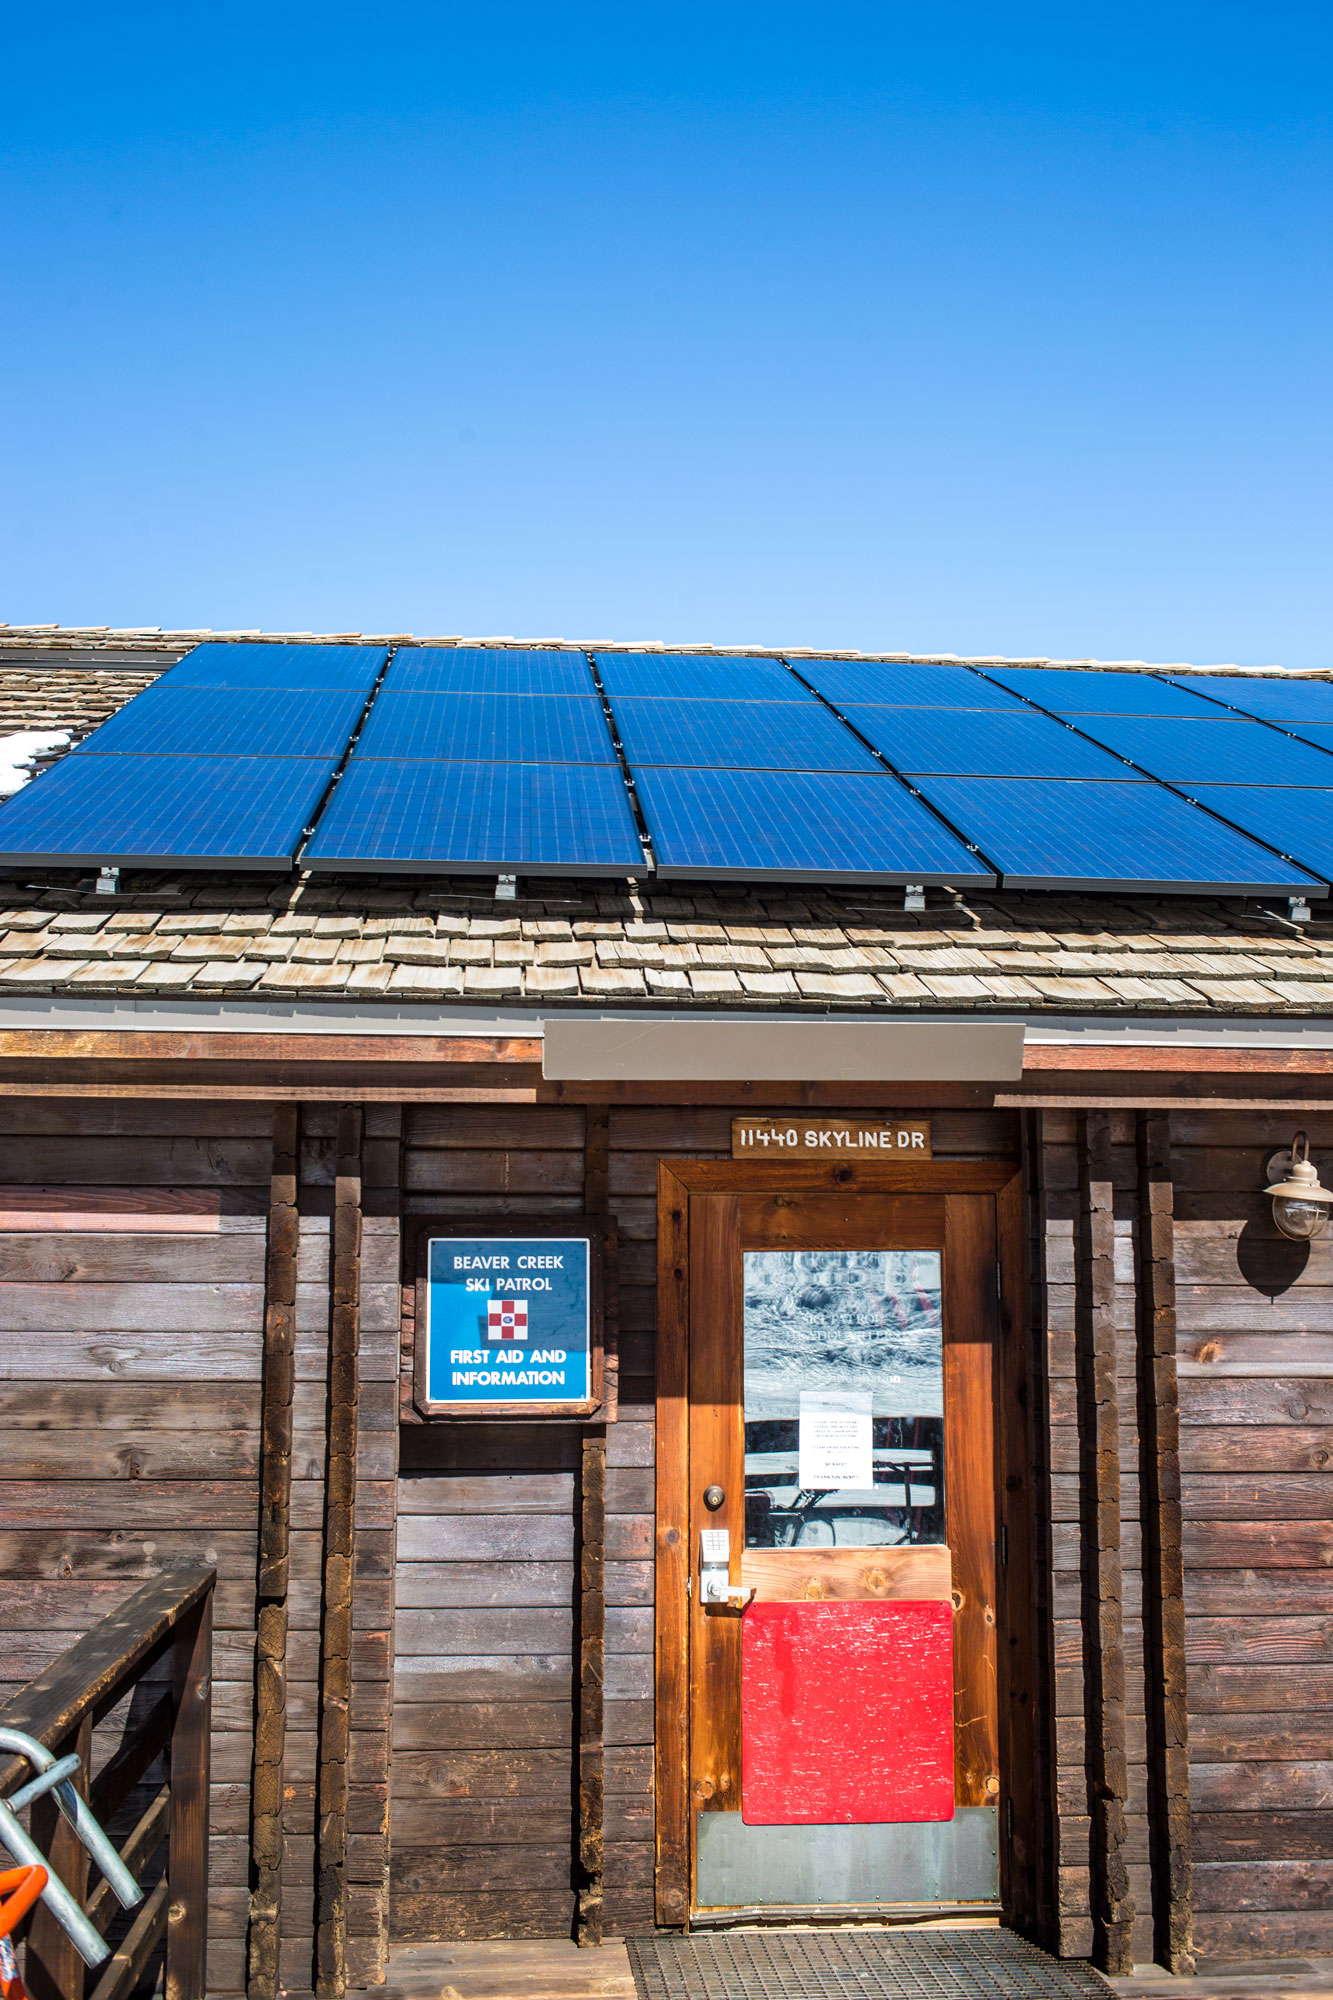 Beaver Creek's Patrol Headquarters has also solar panels for sourcing its electricity. Photo: Vail Resorts. Vail Resorts Announces Long-Term Wind Energy Contract And Plan To Eliminate Conventional Single-Use Dining Plastics In Its ‘Commitment To Zero’.